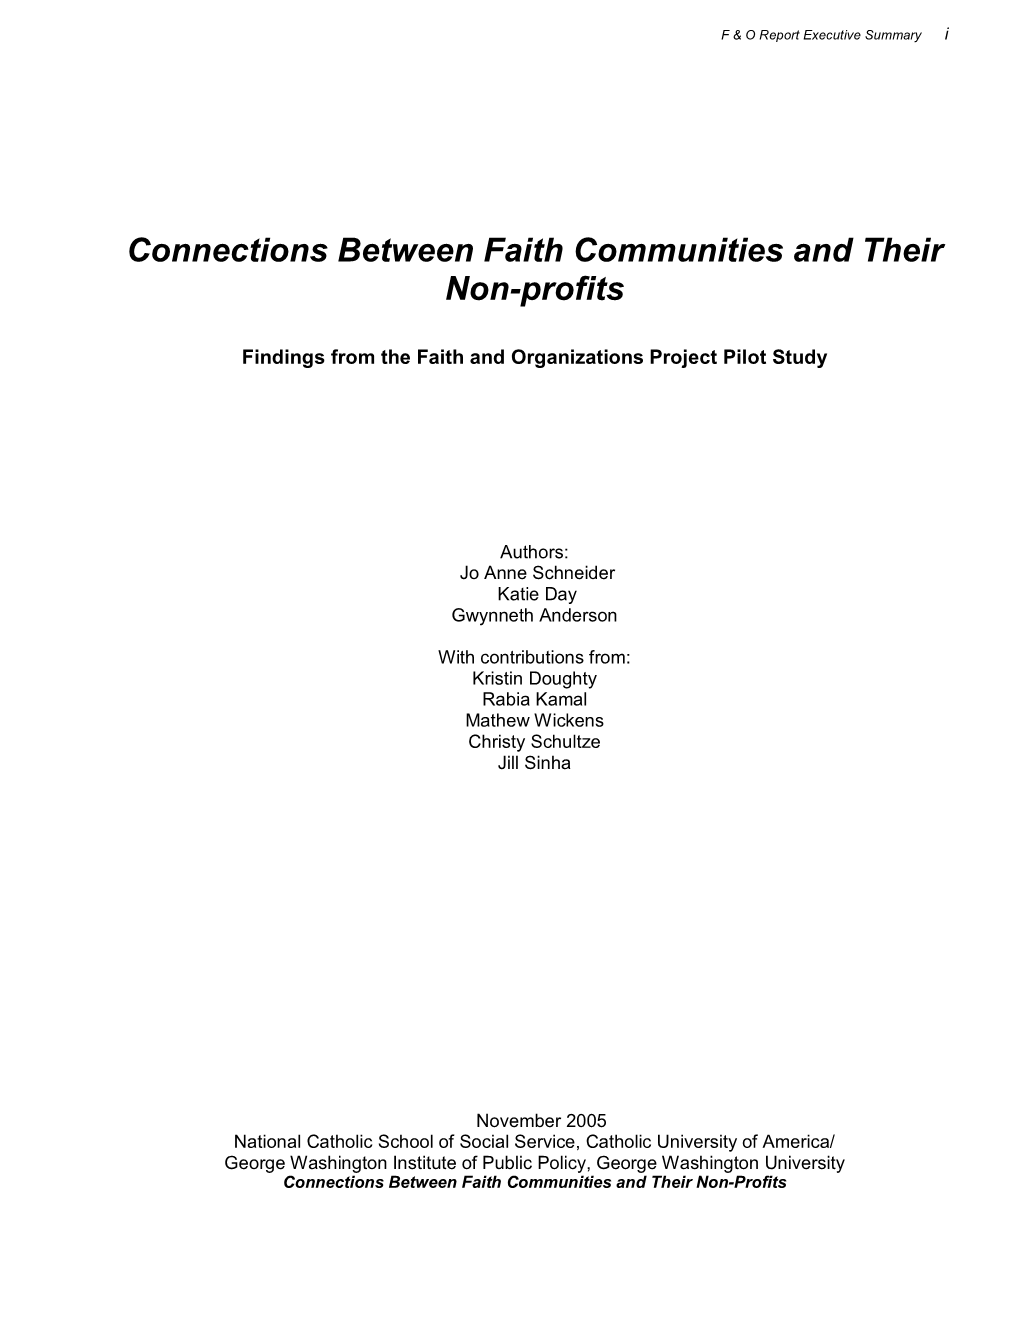 Connections Between Faith Communities and Their Non-Profits